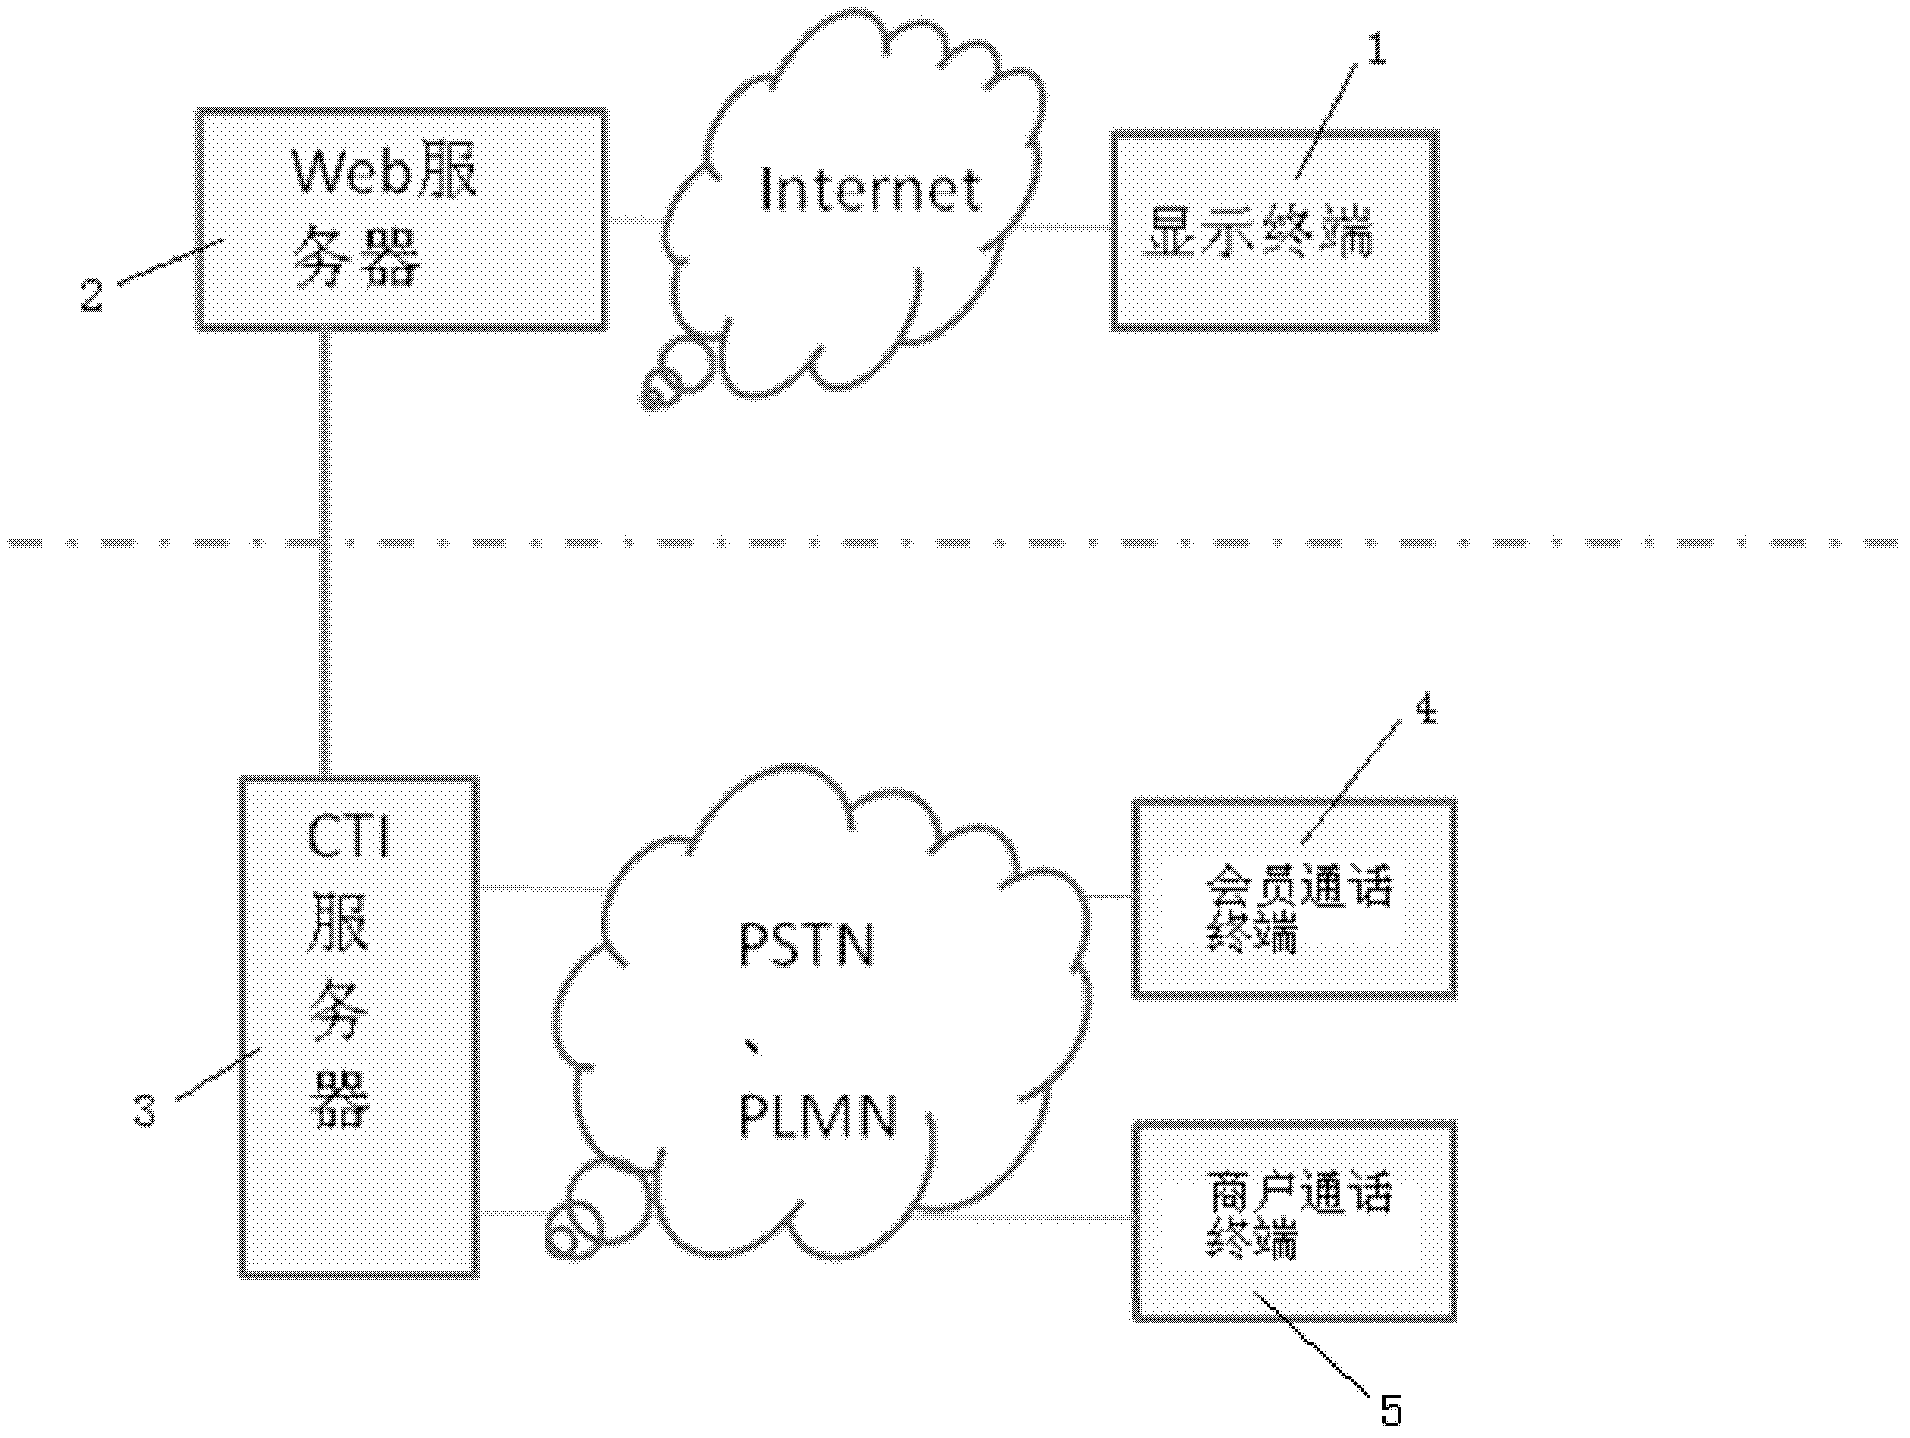 Method and system for making call through webpage